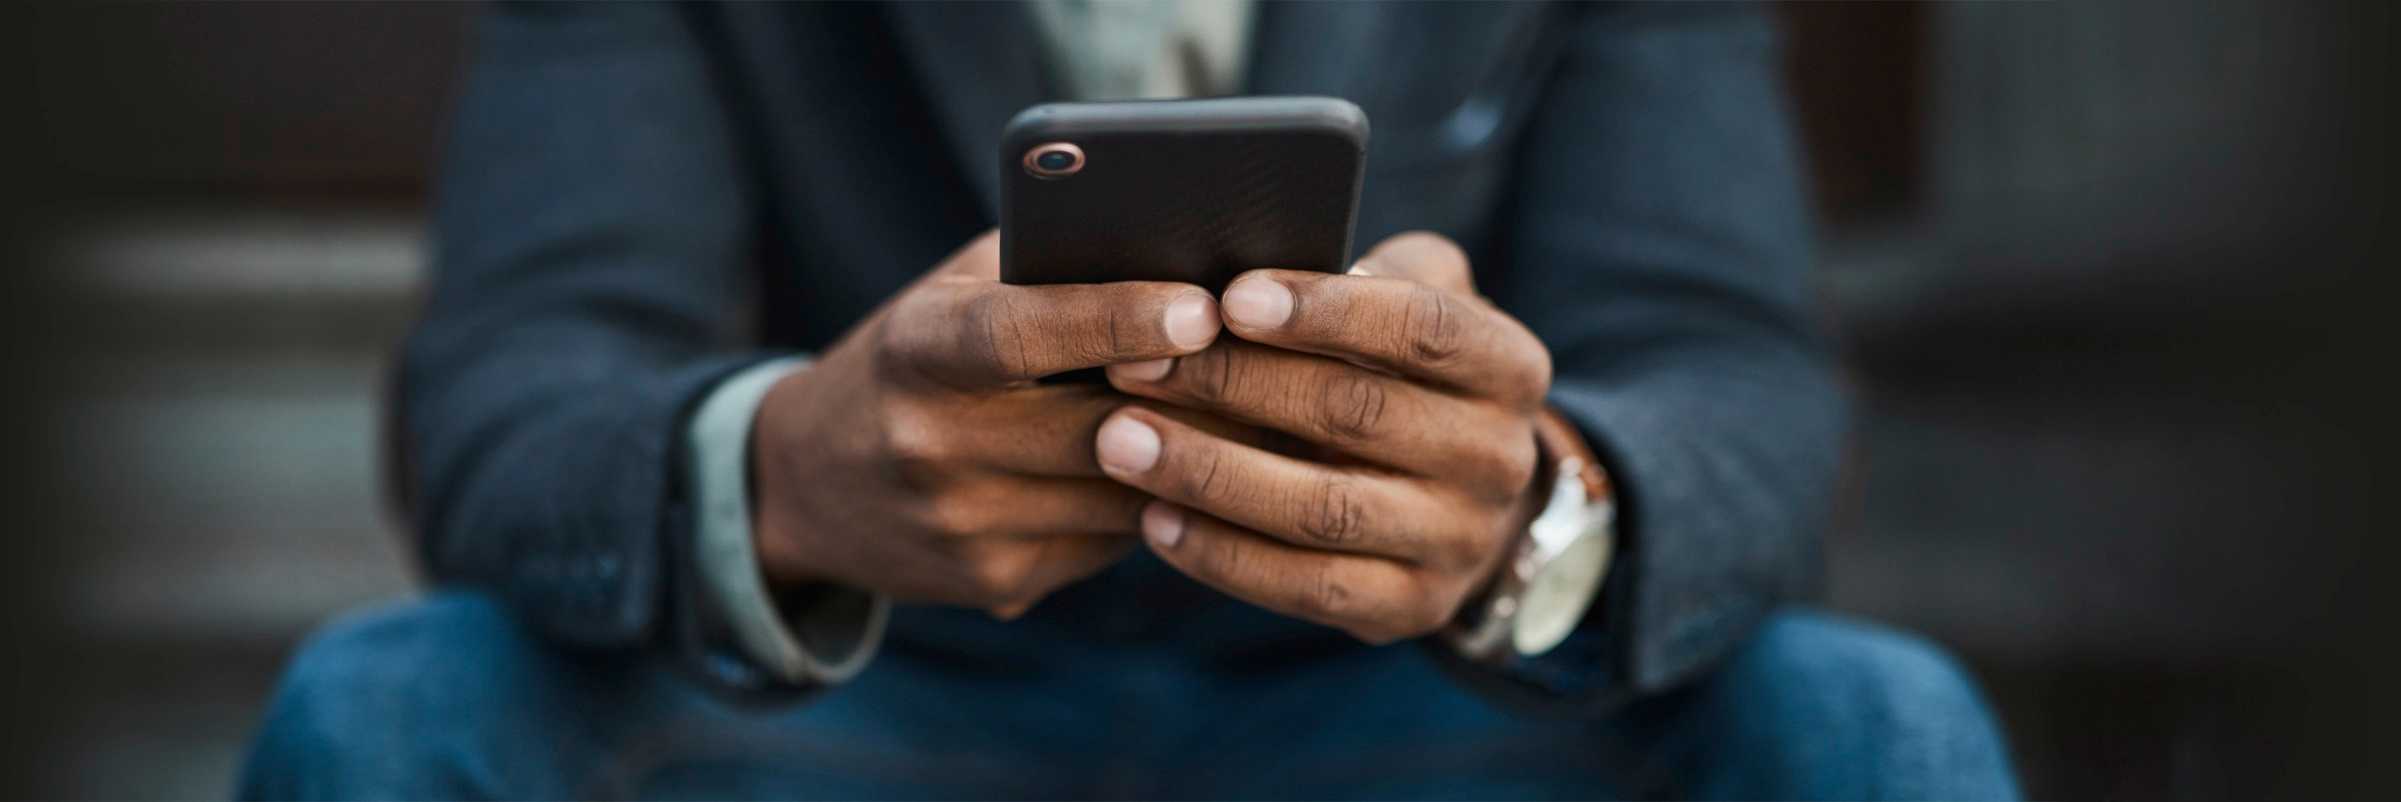 Close up of man using a smartphone